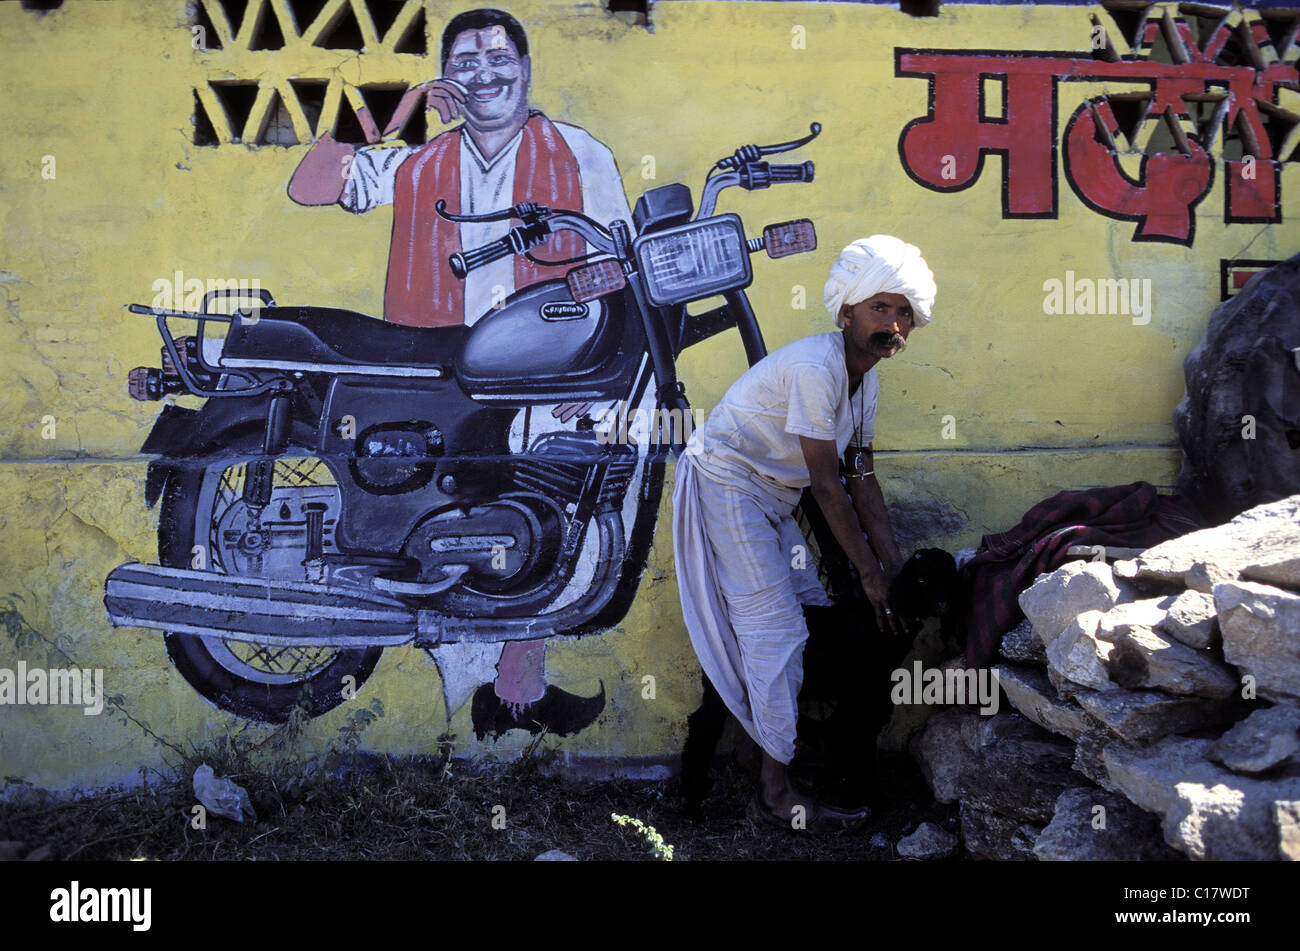 India, Rajasthan State, advertisement for a Royal Enfield Stock Photo -  Alamy